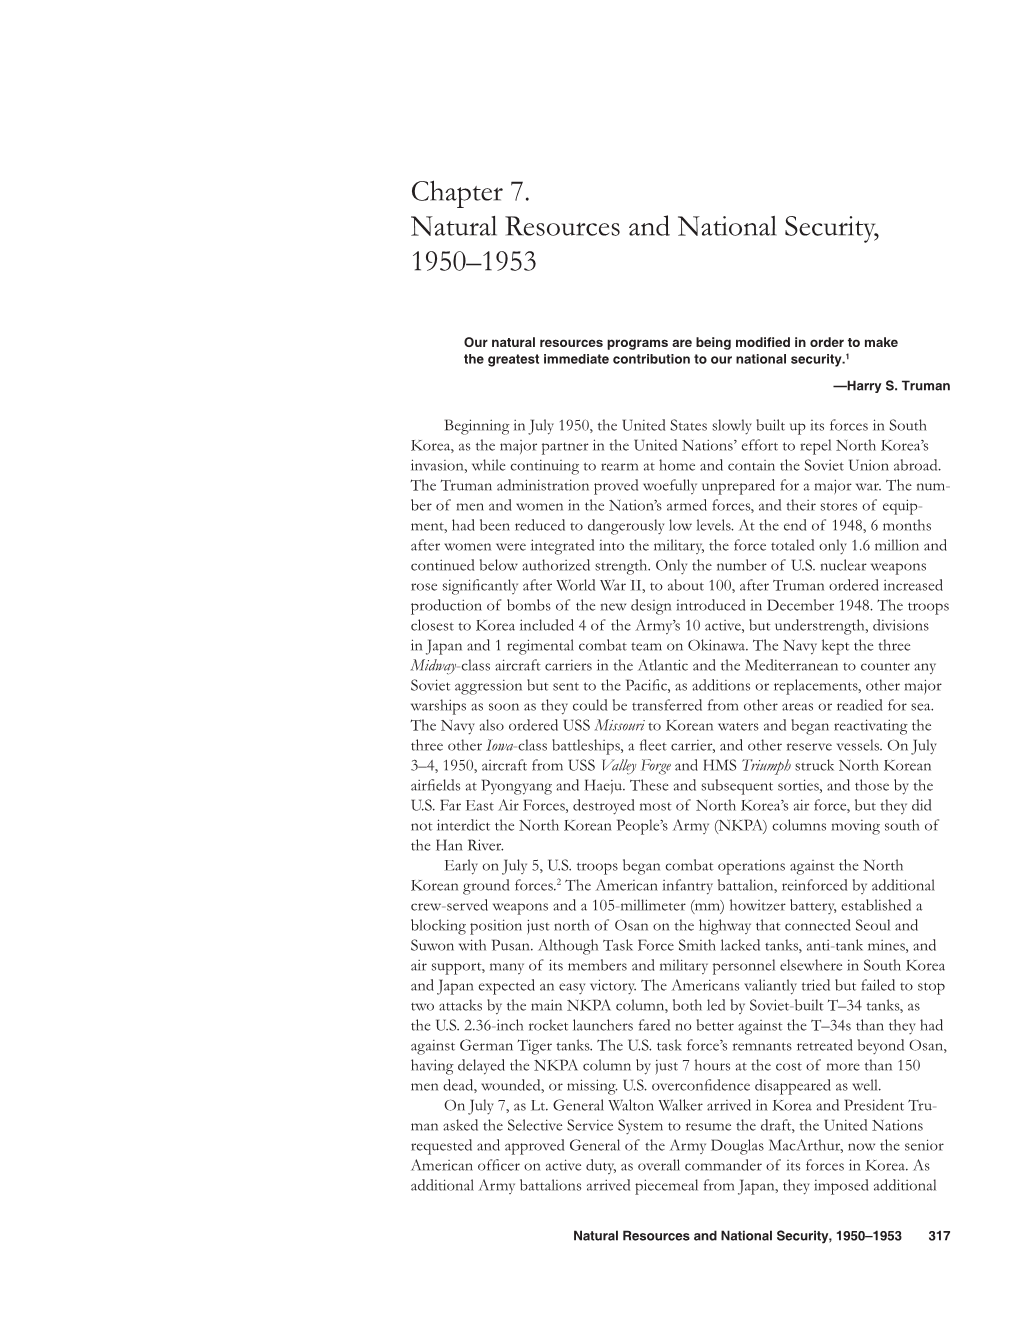 Chapter 7. Natural Resources and National Security, 1950–1953